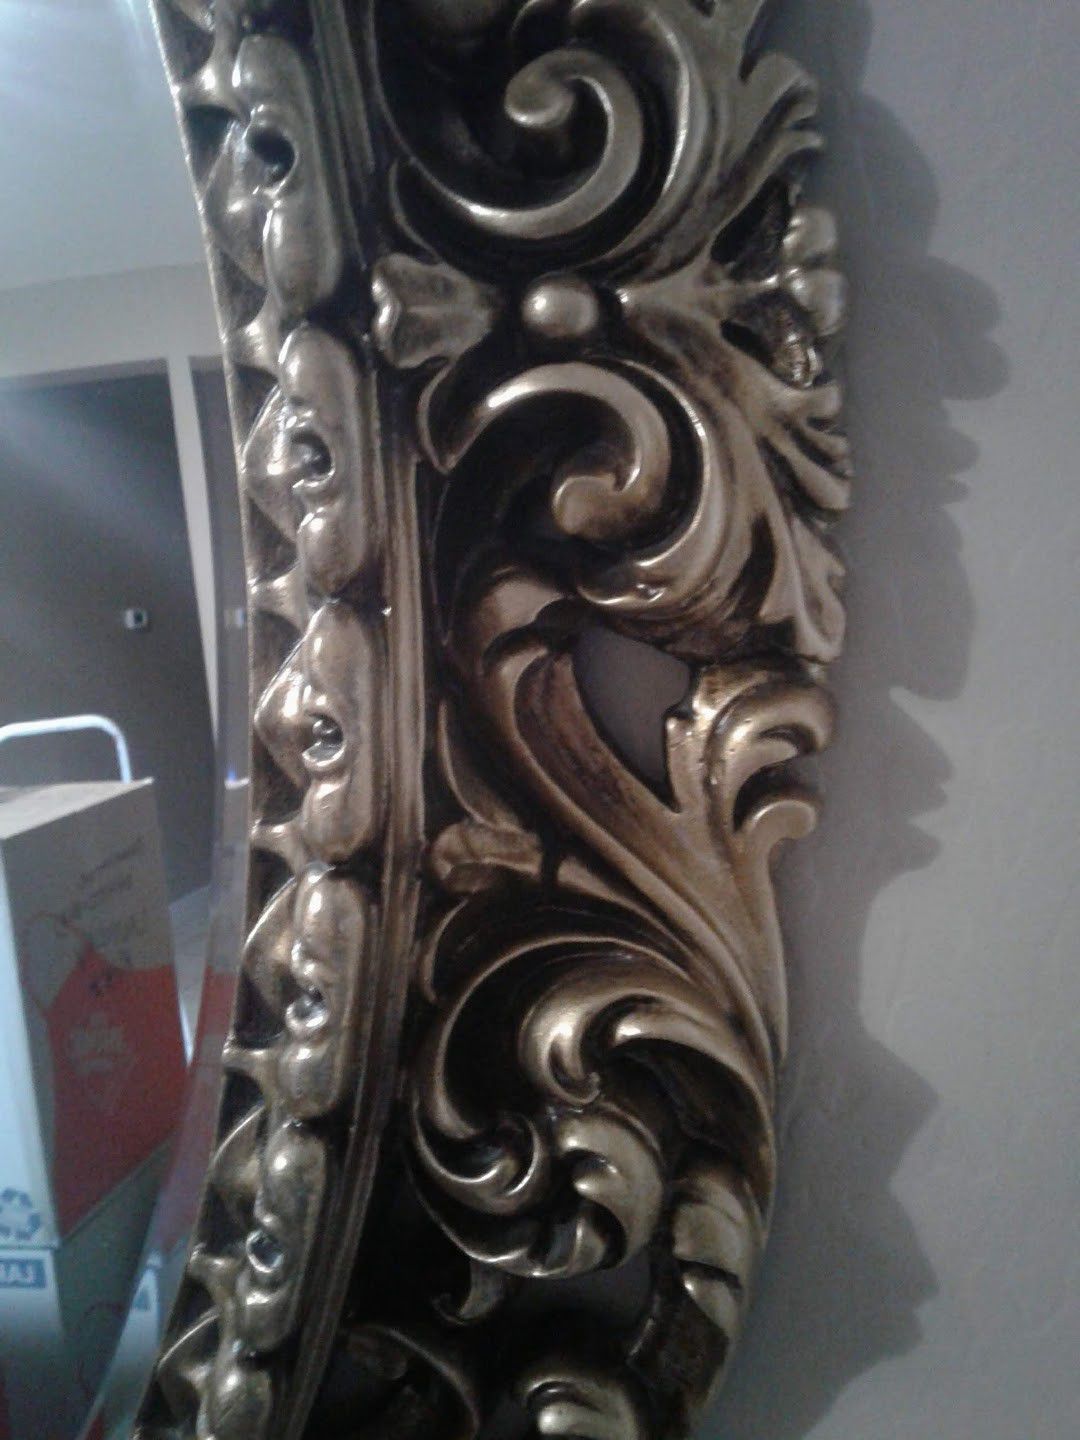 Large Oval Mirror